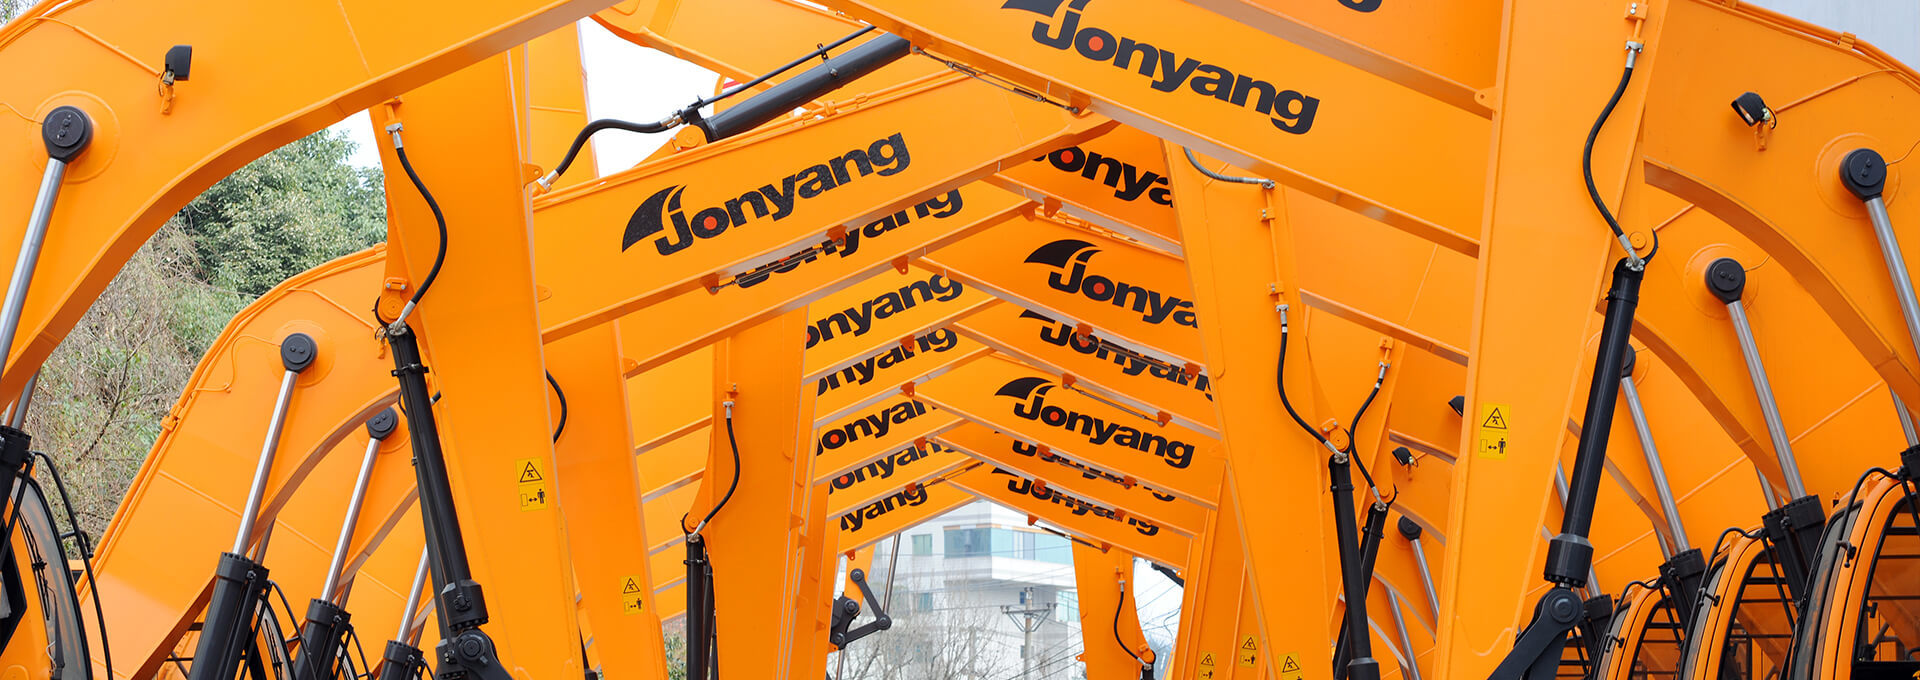 JONYANG KINETICS is a construction machinery enterprise with a history of more than 80 years